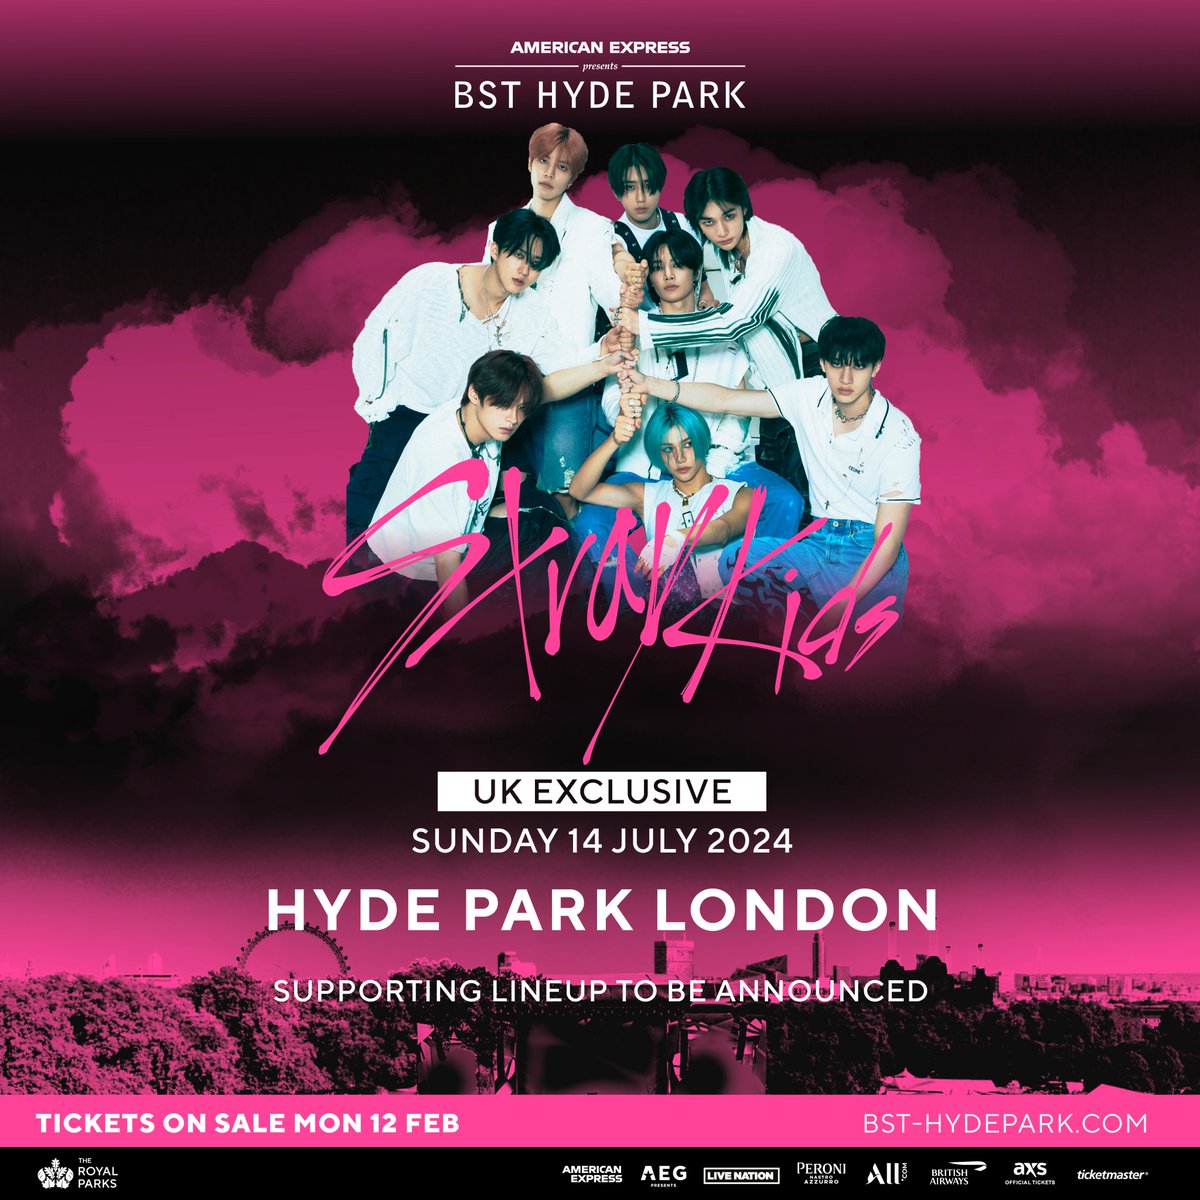 The @bsthydepark presale is now live! Check your email inbox and secure your tickets to see @Stray_Kids at American Express presents BST Hyde Park ⚡️ Tickets go on general sale at 10am GMT Monday 12 February. For more information, visit bst-hydepark.com/events/stray-k… #BSTHydePark…